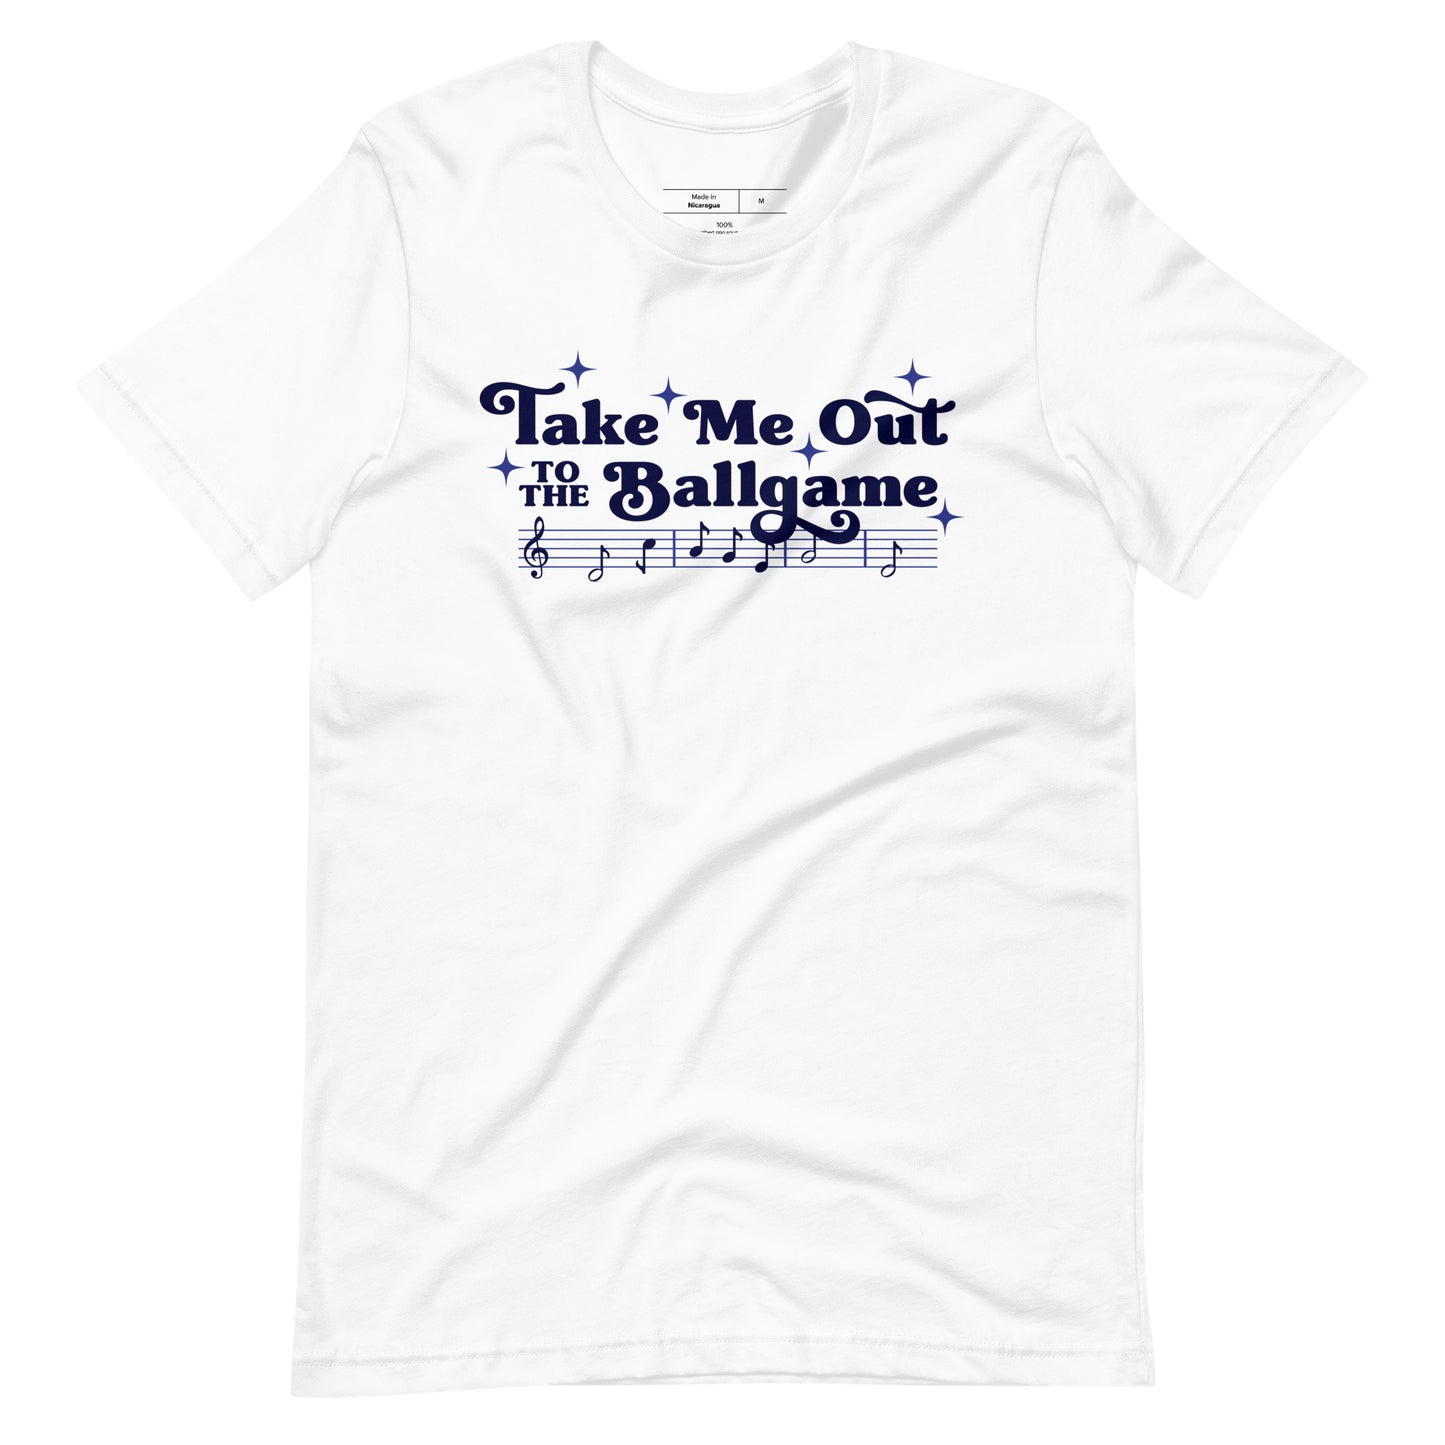 Image of white t-shirt with design of "Take Me Out to the Ballgame" with coordinating musical notes in navy located on centre chest. This design is exclusive to Tailgate Mercantile and available only online.